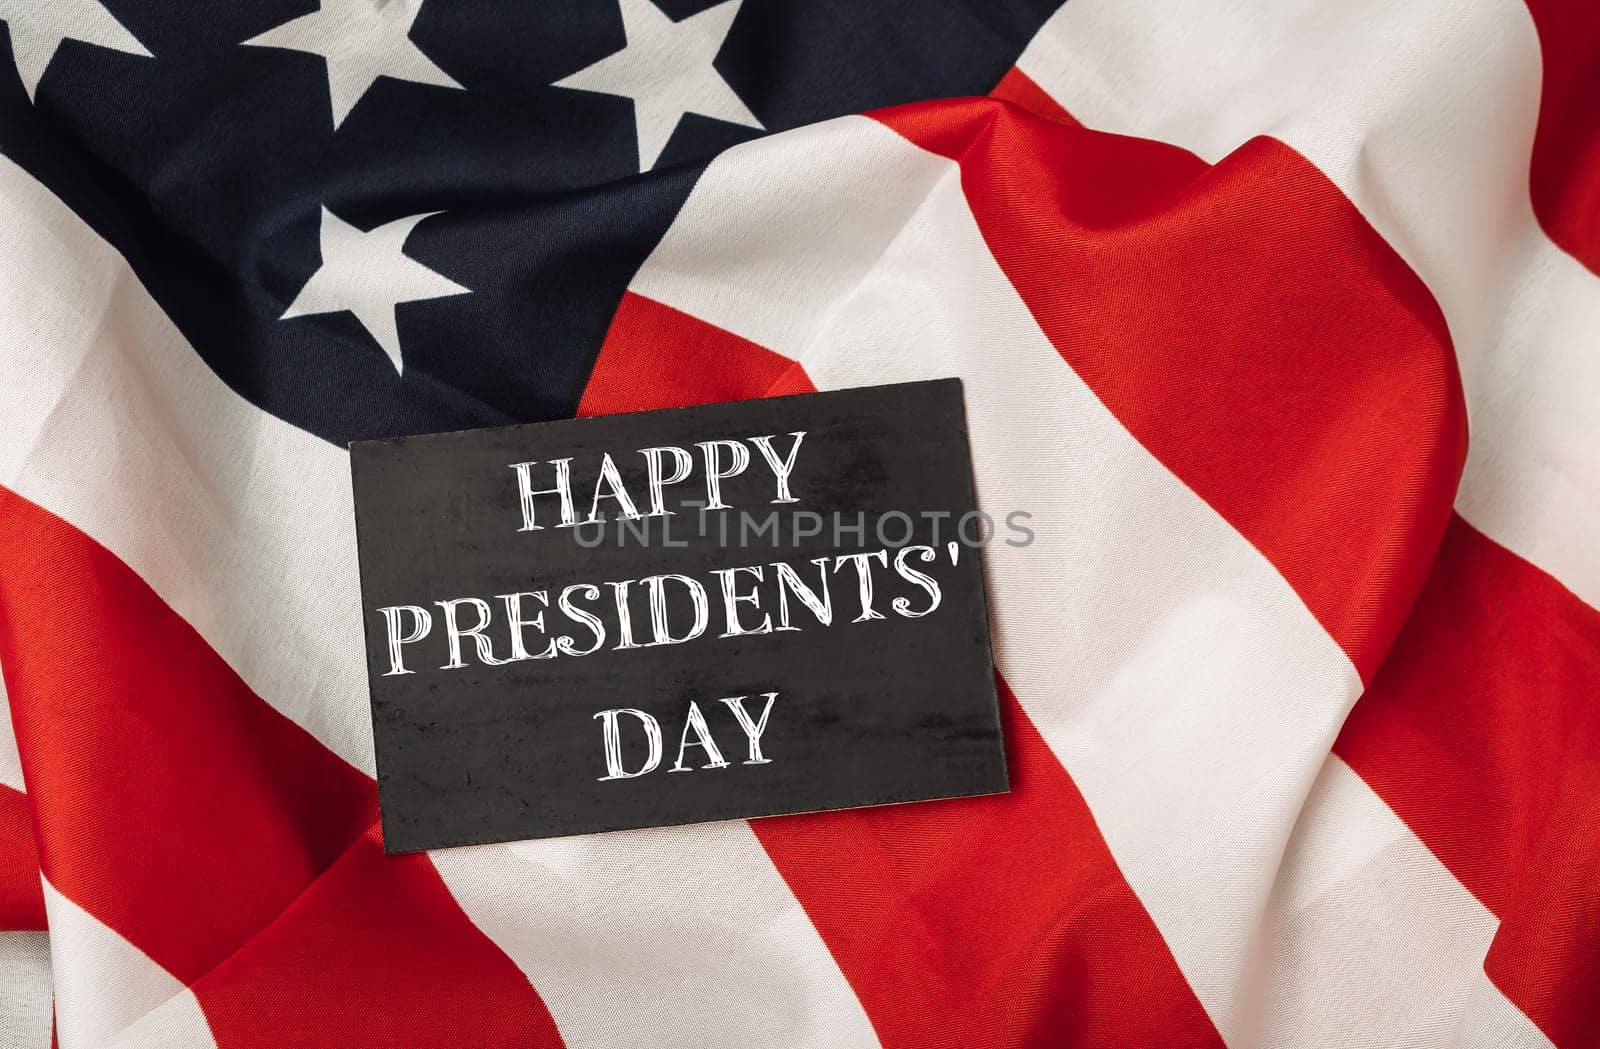 A black sign with the words Happy Presidents' Day written on it is placed on top of a red and white American flag